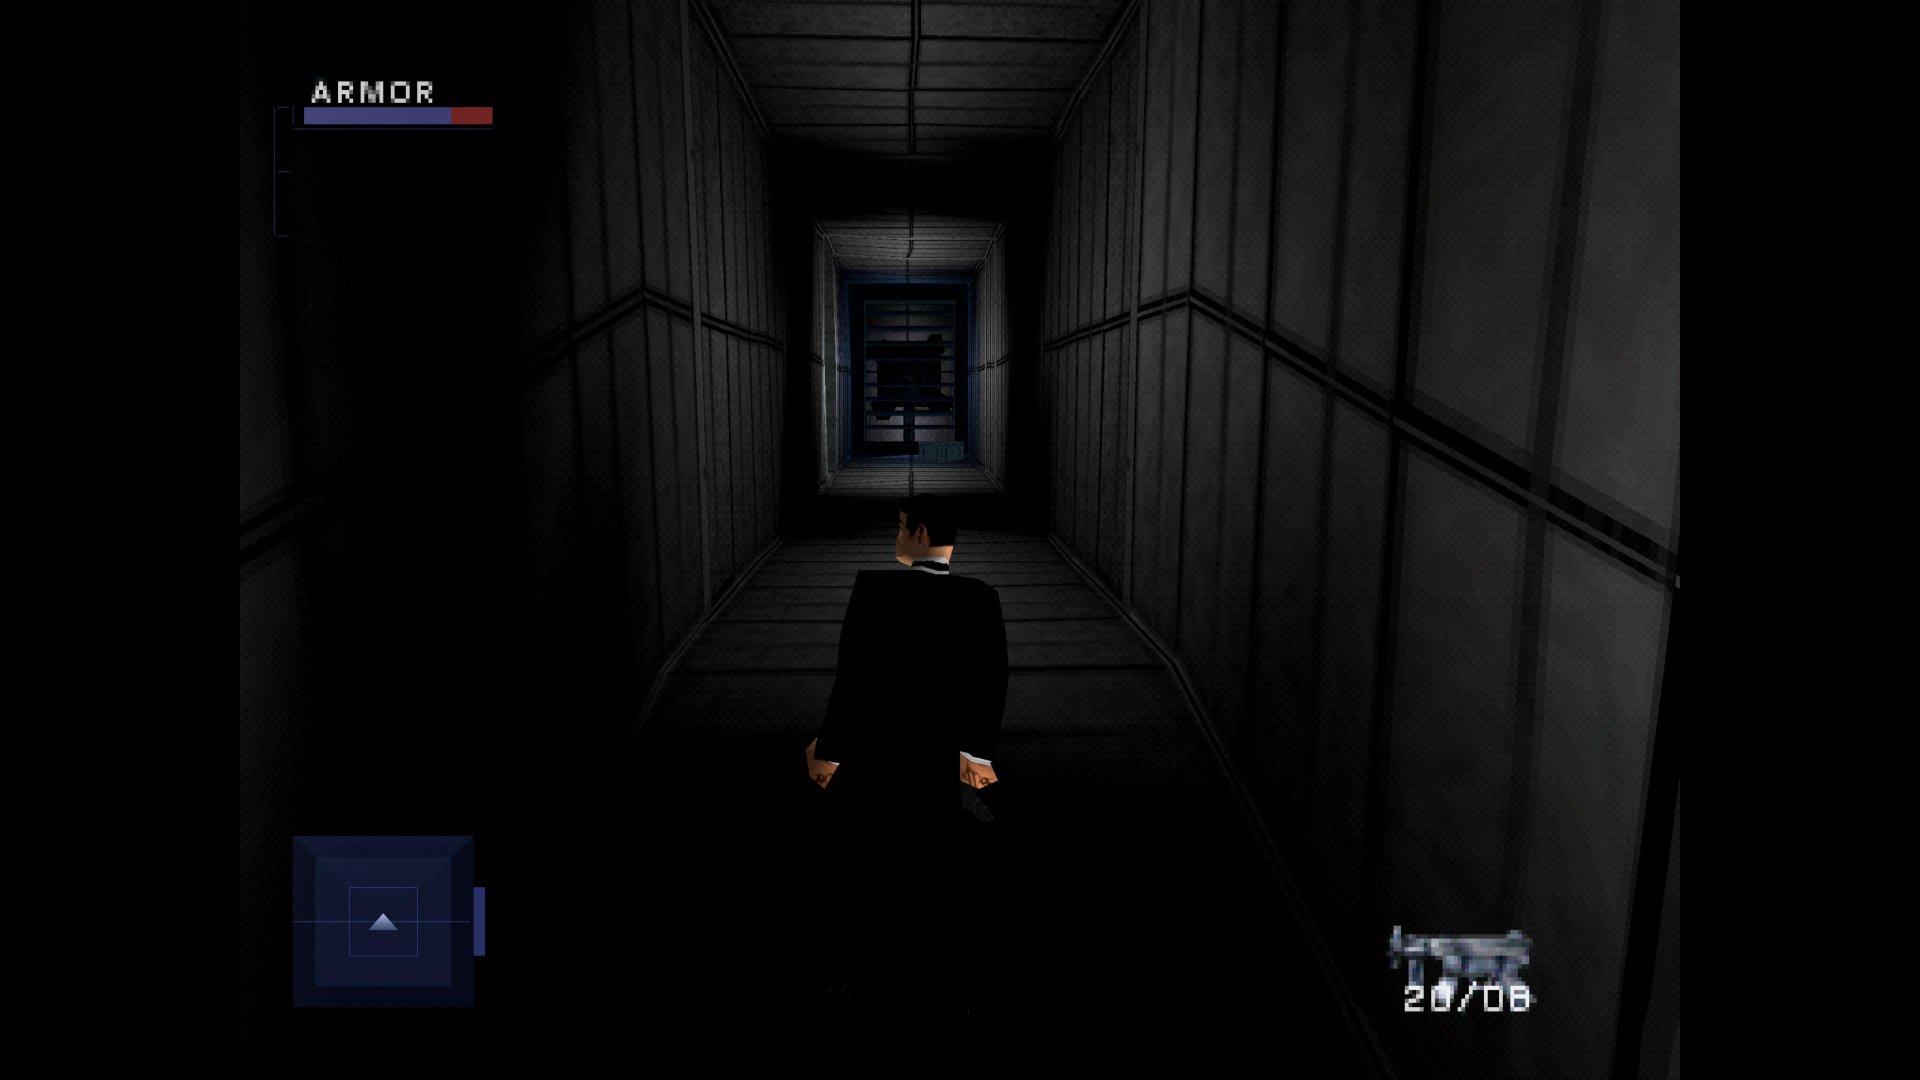 Syphon Filter: Dark Mirror patched with improved controls